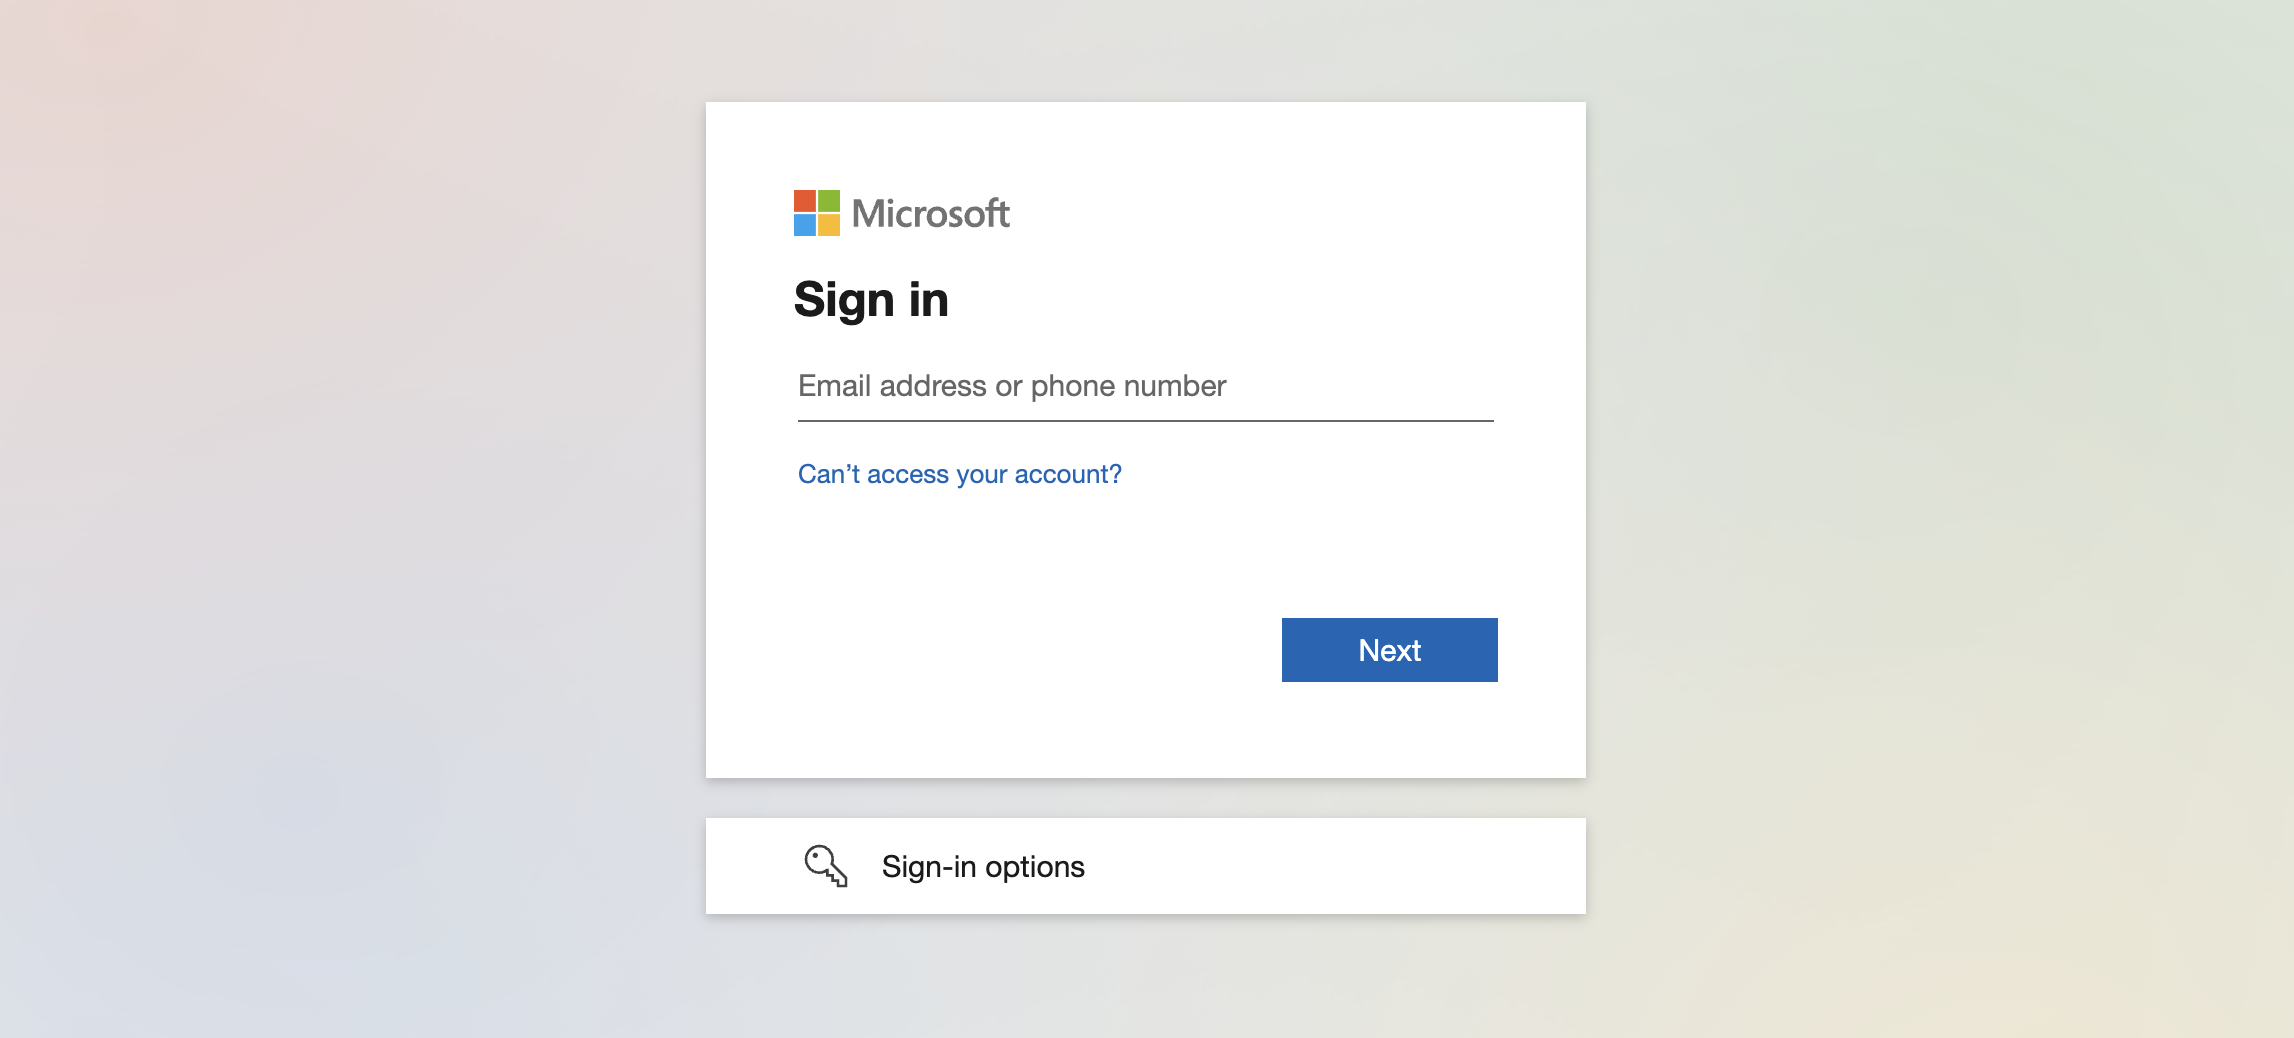 The Microsoft sign in flow